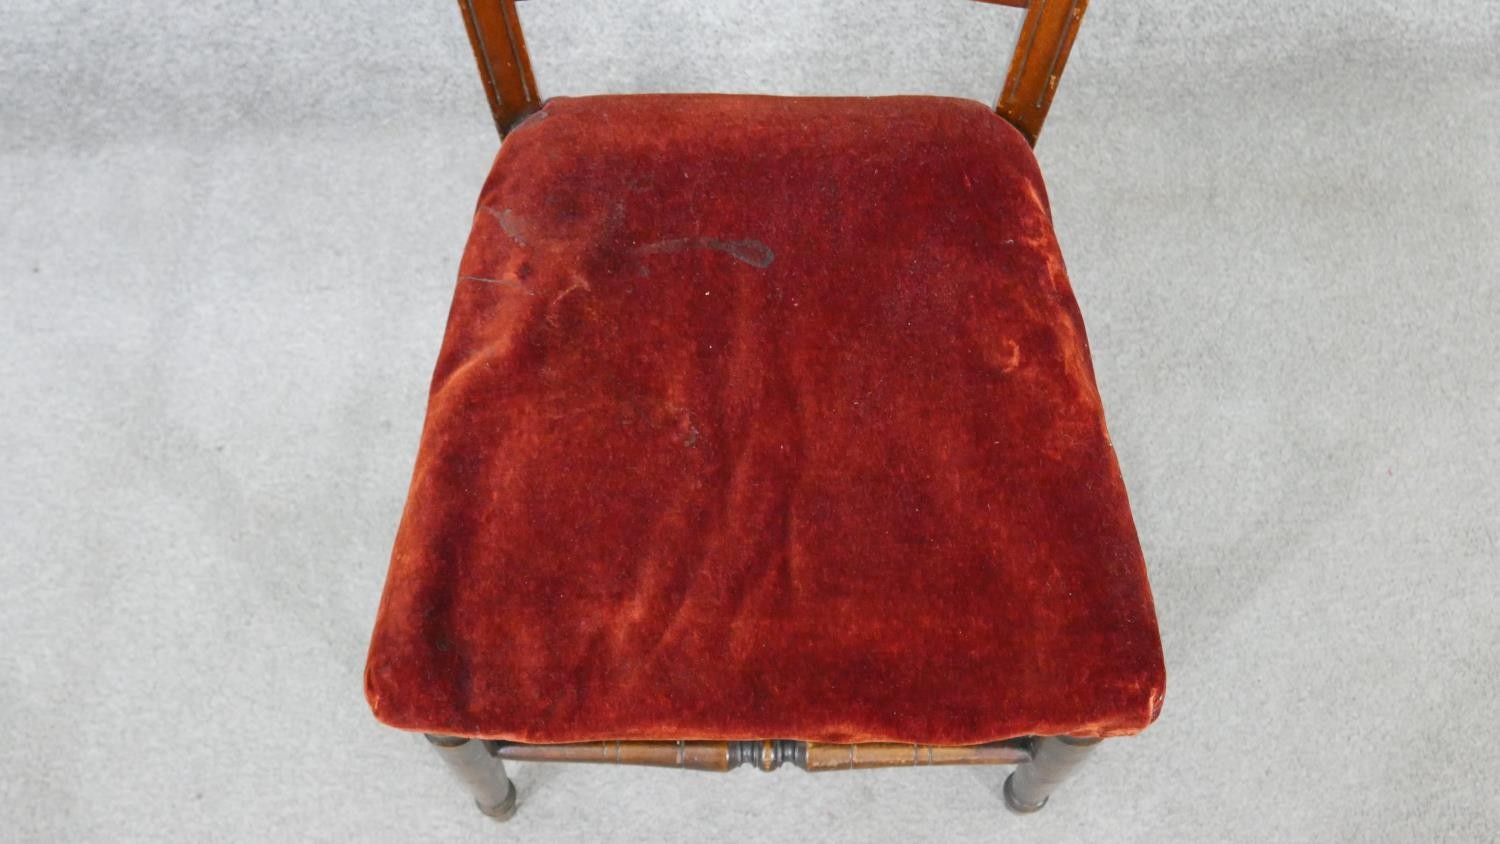 A pair of Edwardian walnut side chairs, the back with a carved foliate splat, over a red velour - Image 3 of 6